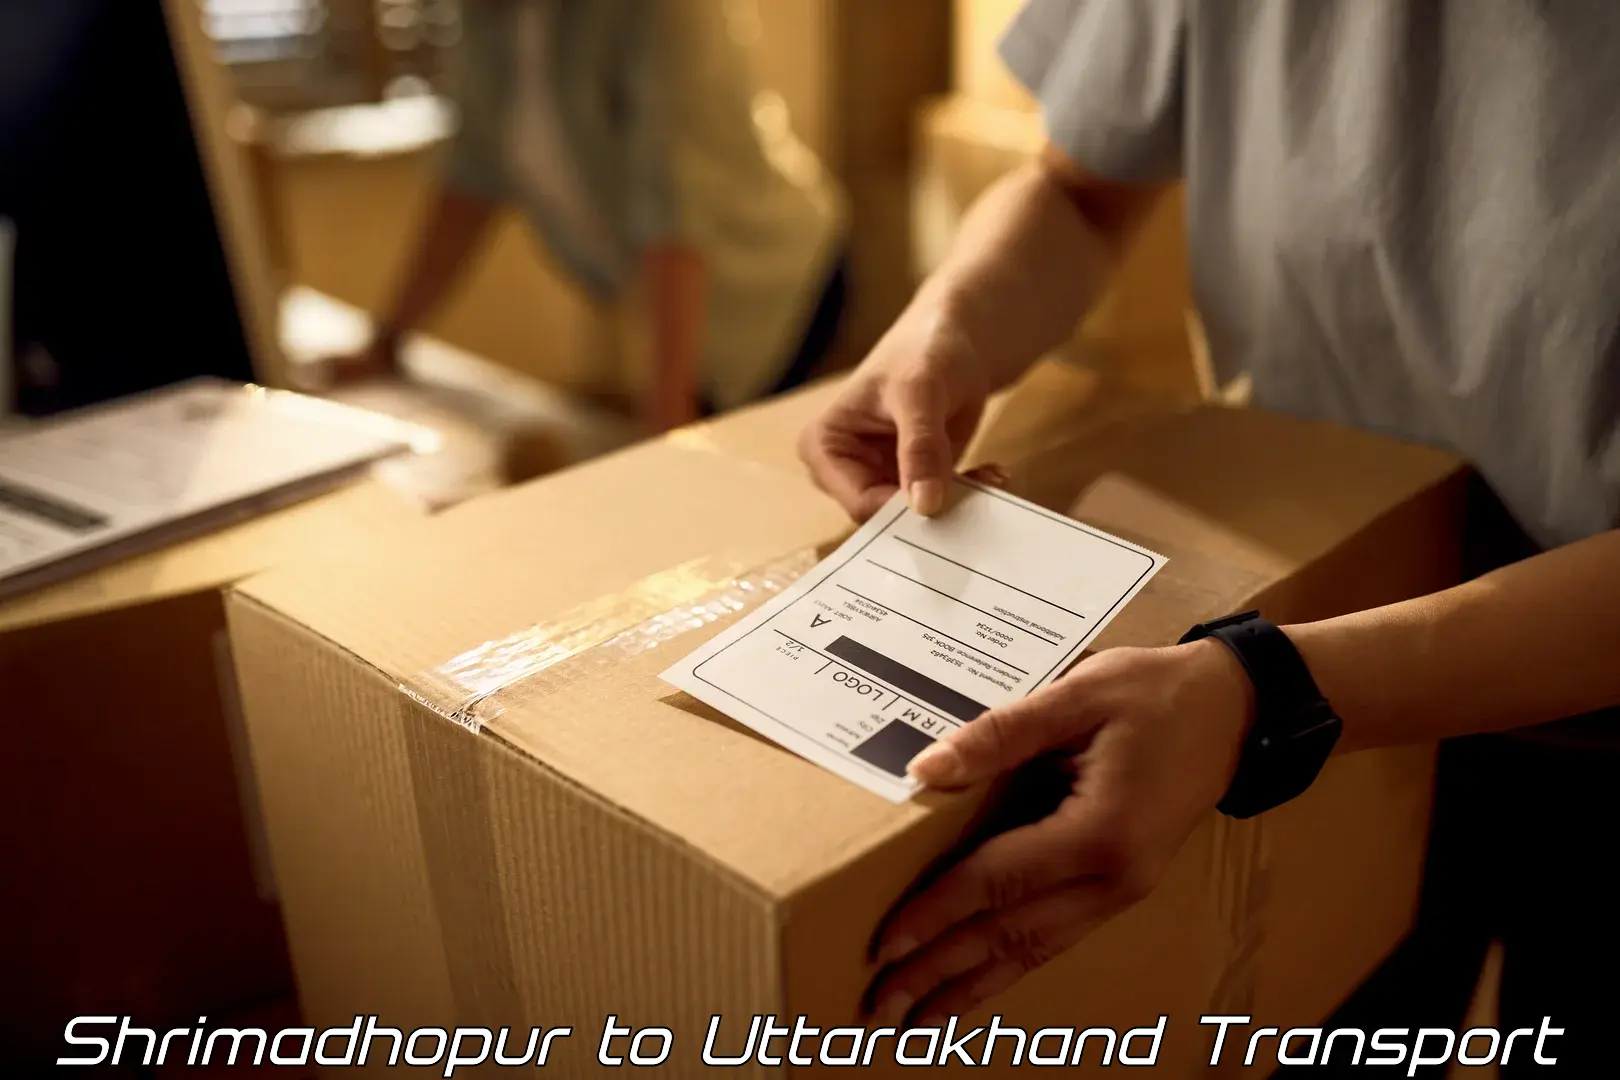 Express transport services in Shrimadhopur to Pithoragarh